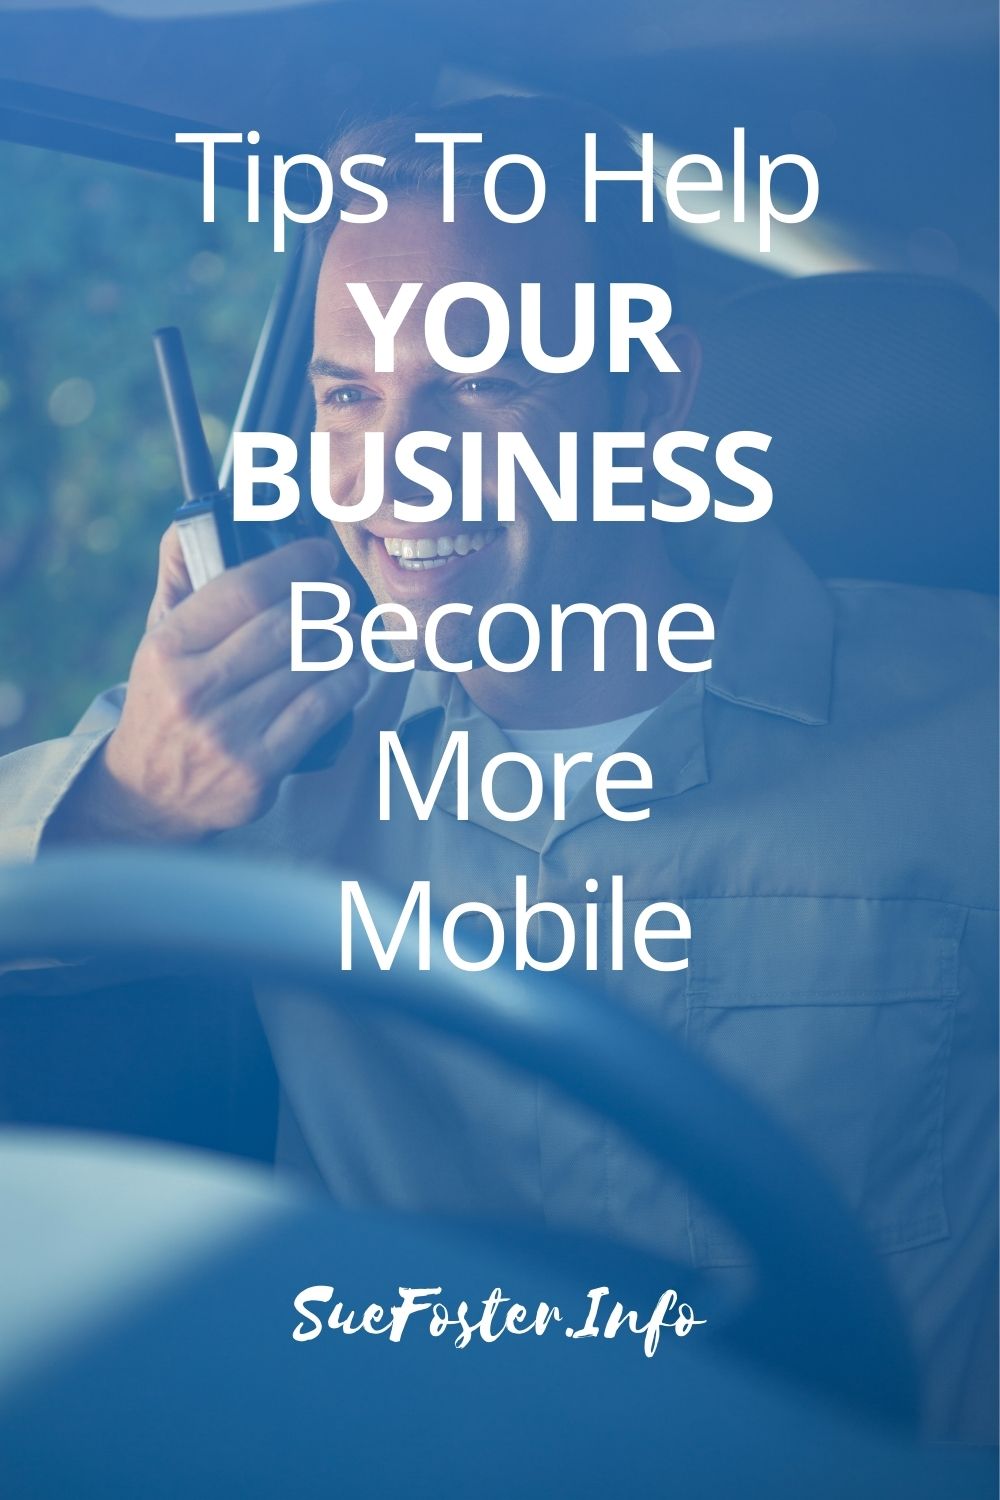 Follow these tips to help your business become more mobile and make sure everything goes successfully when delivering products to your customers.